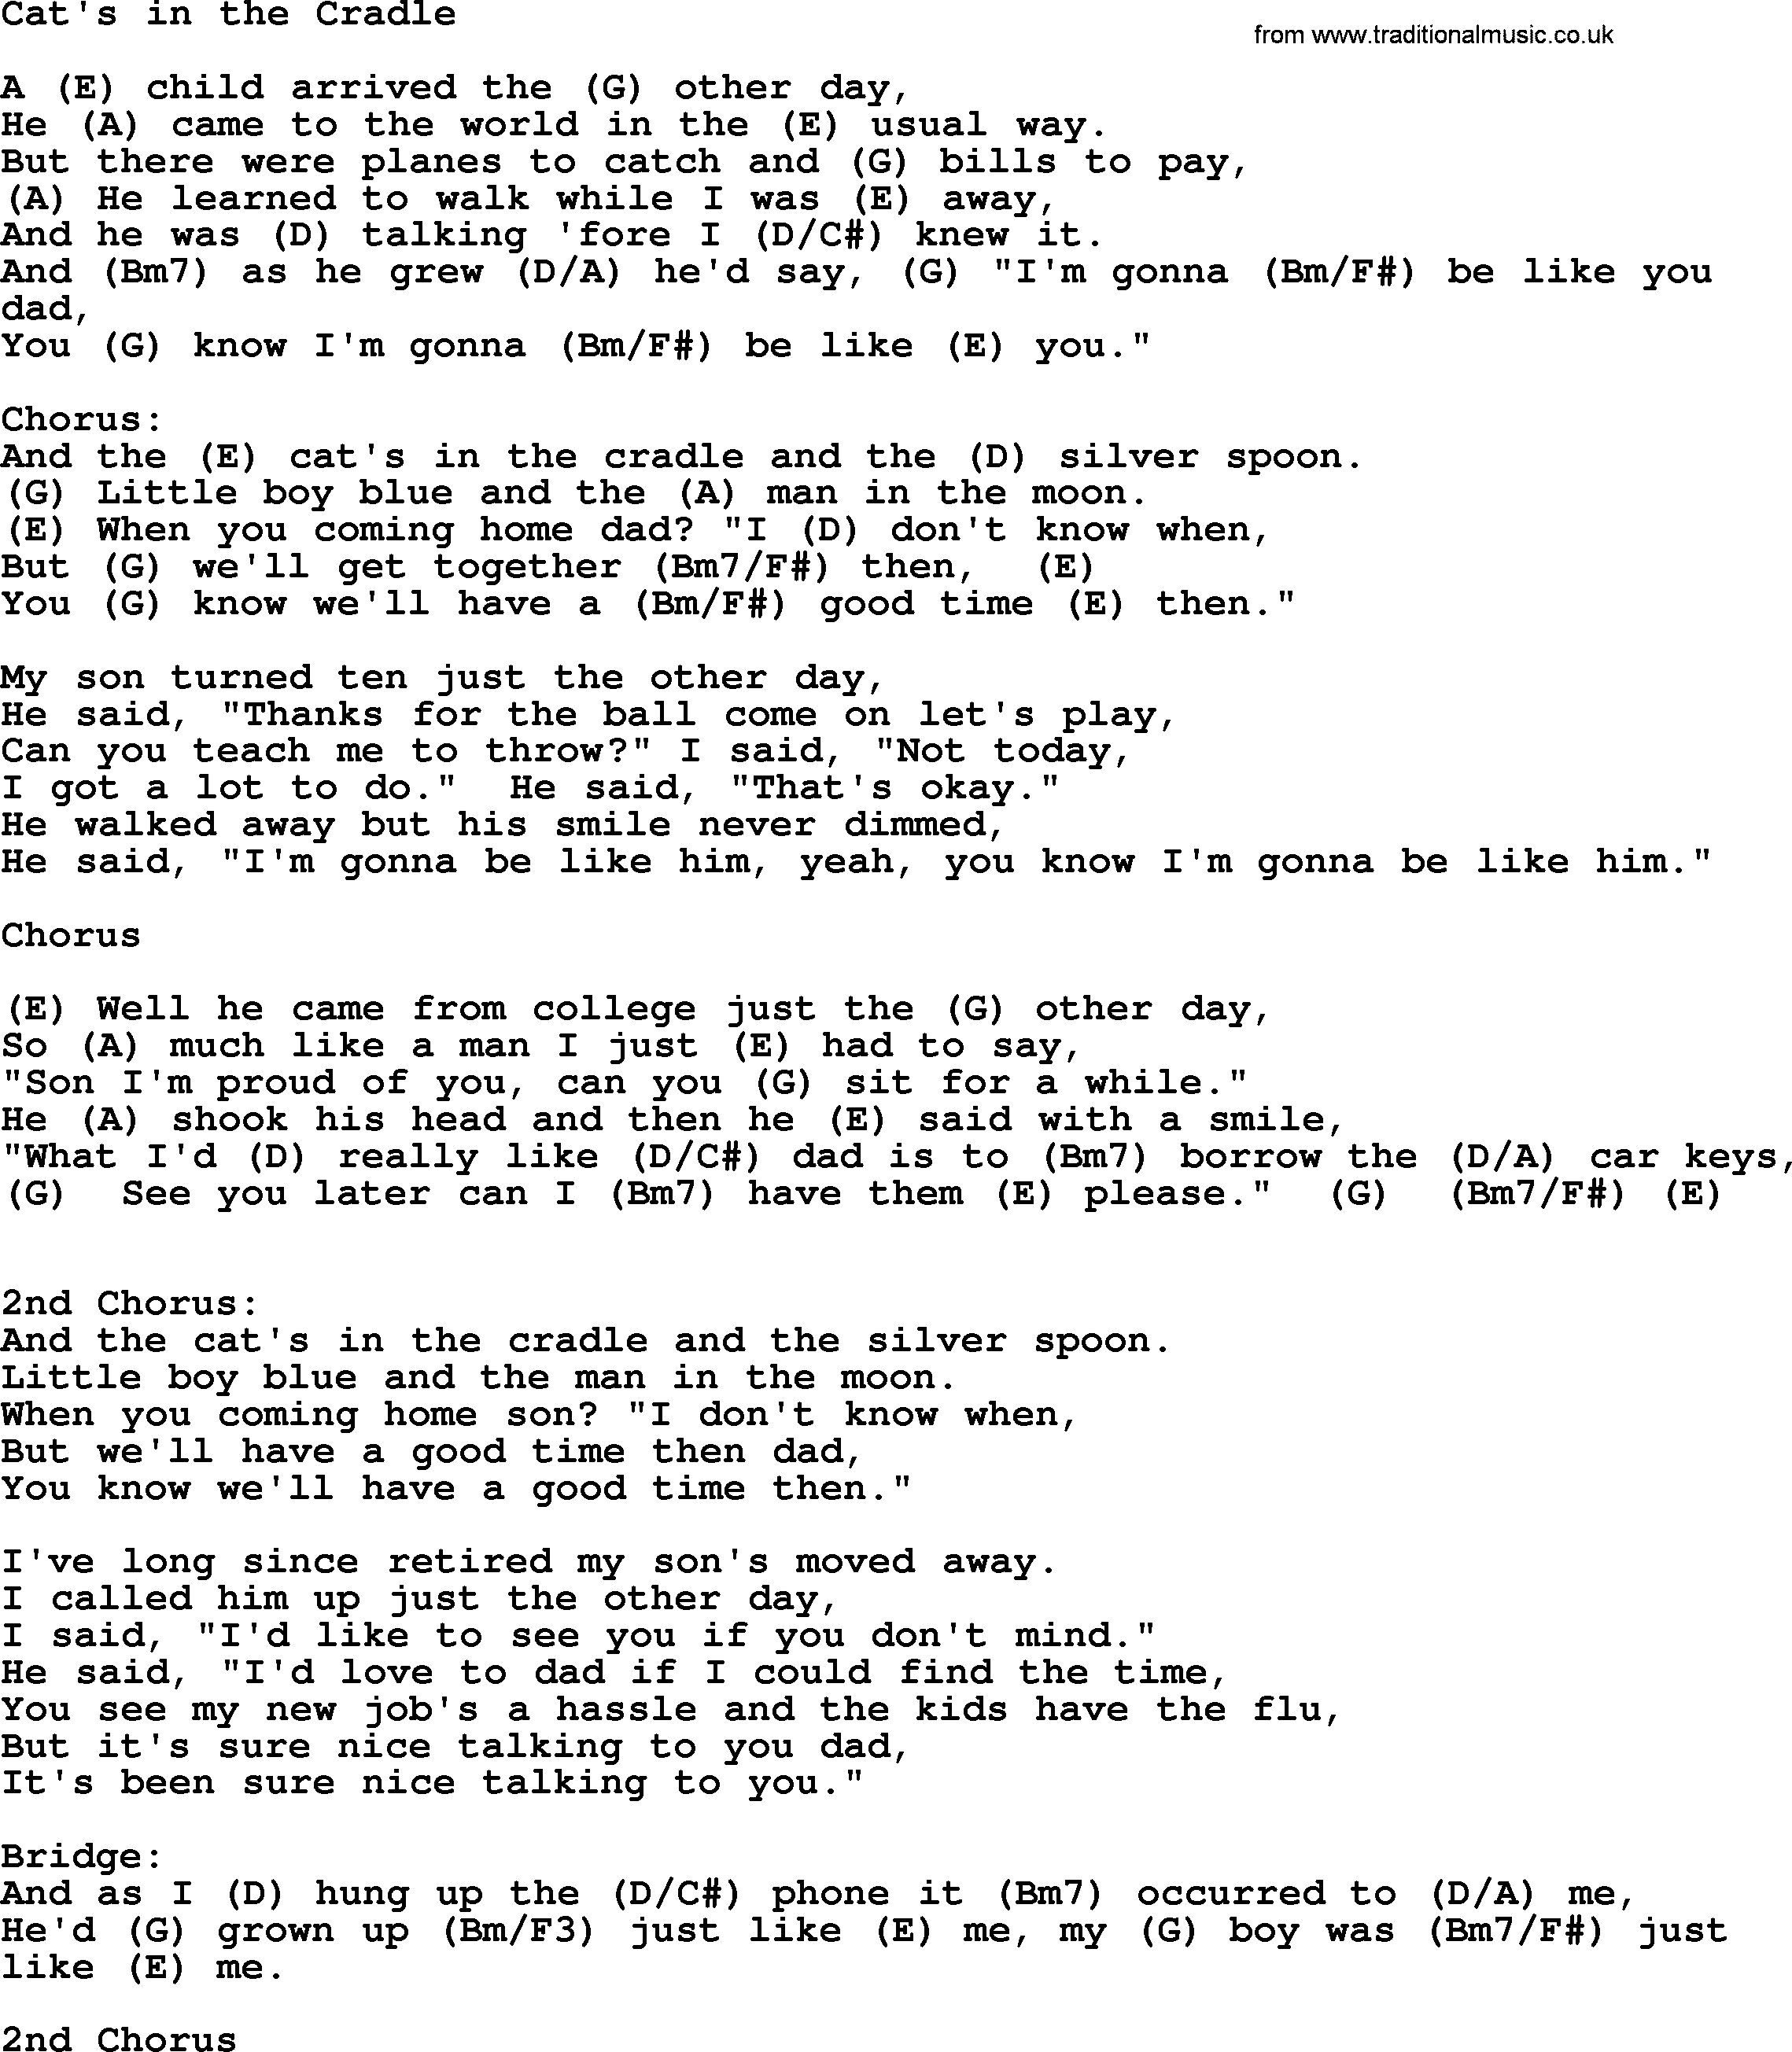 Johnny Cash song Cat's In The Cradle, lyrics and chords